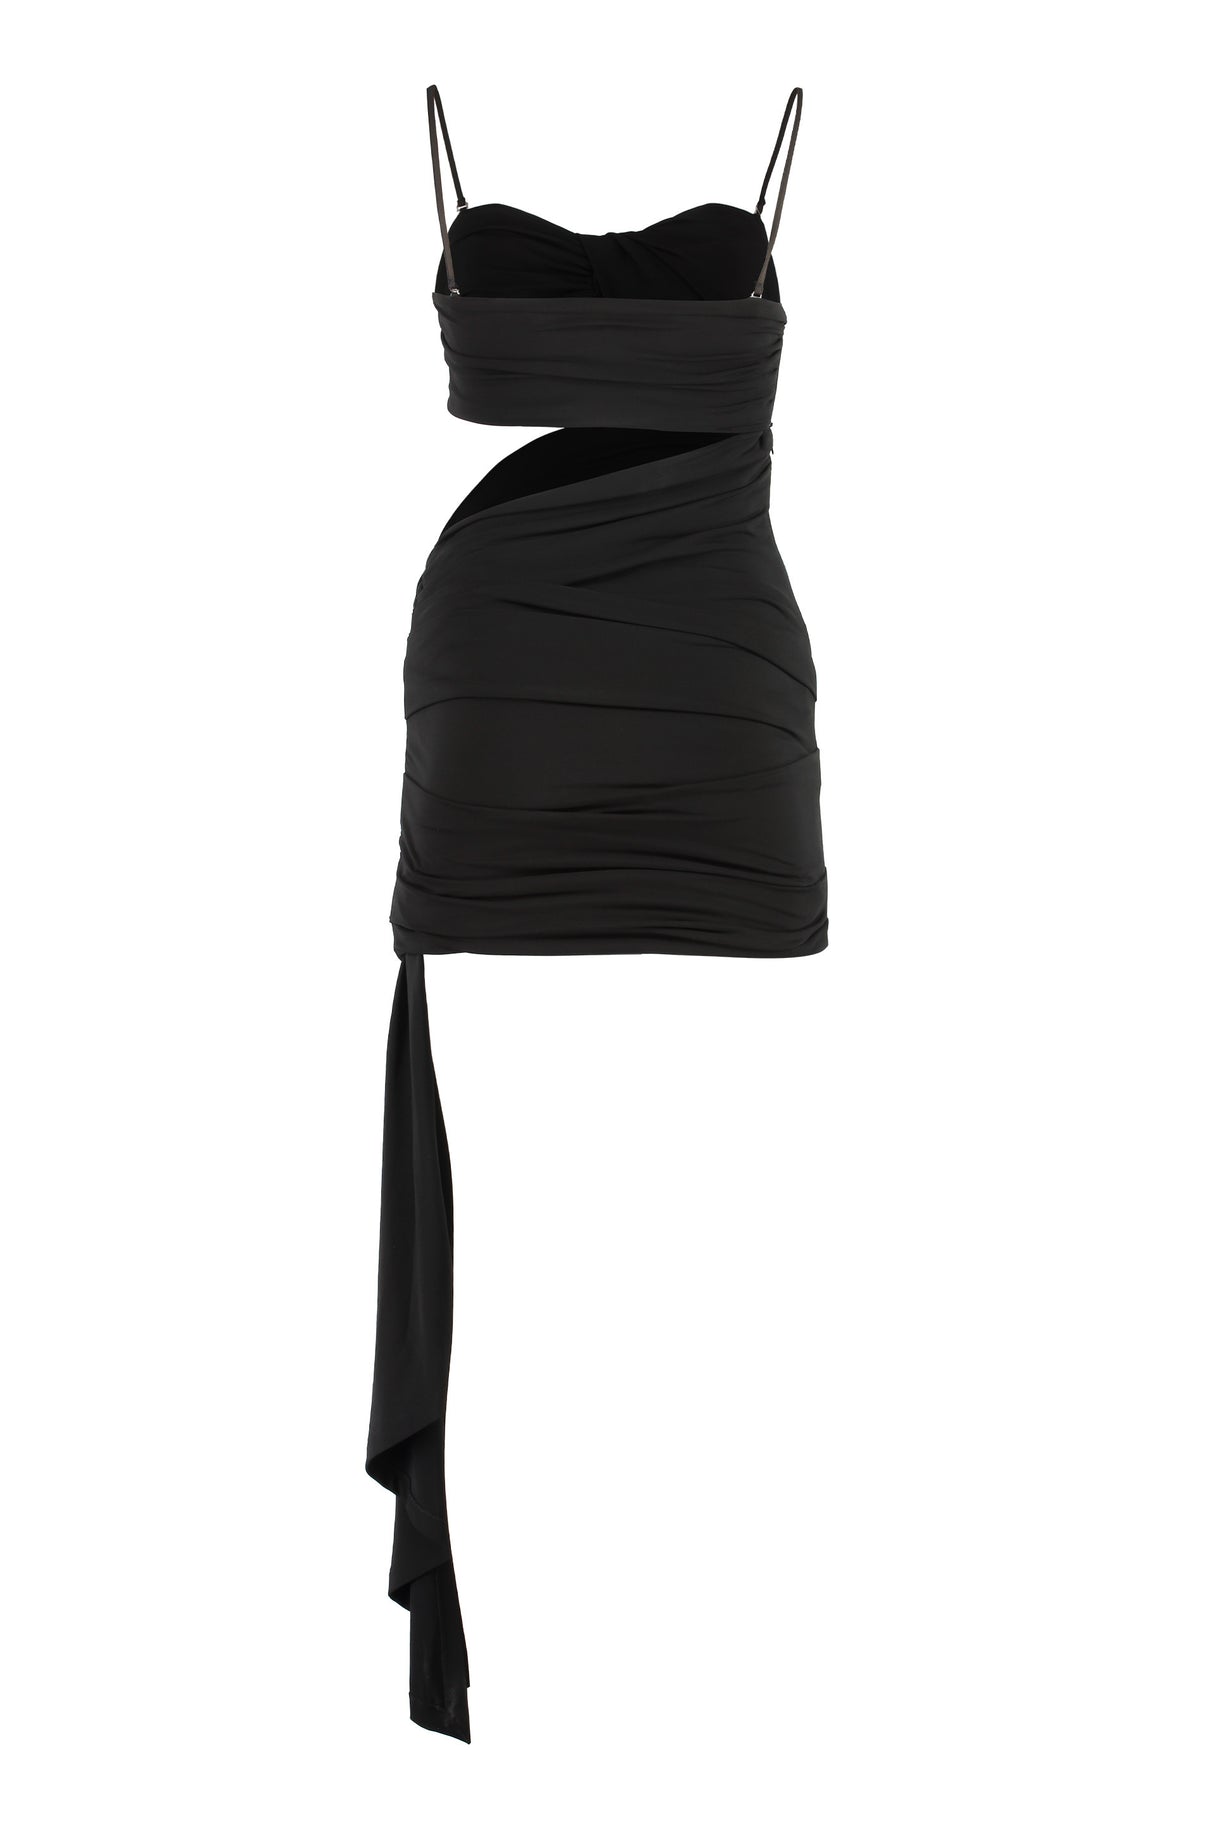 OFF-WHITE Black Cut-Out Crepe Dress for Women